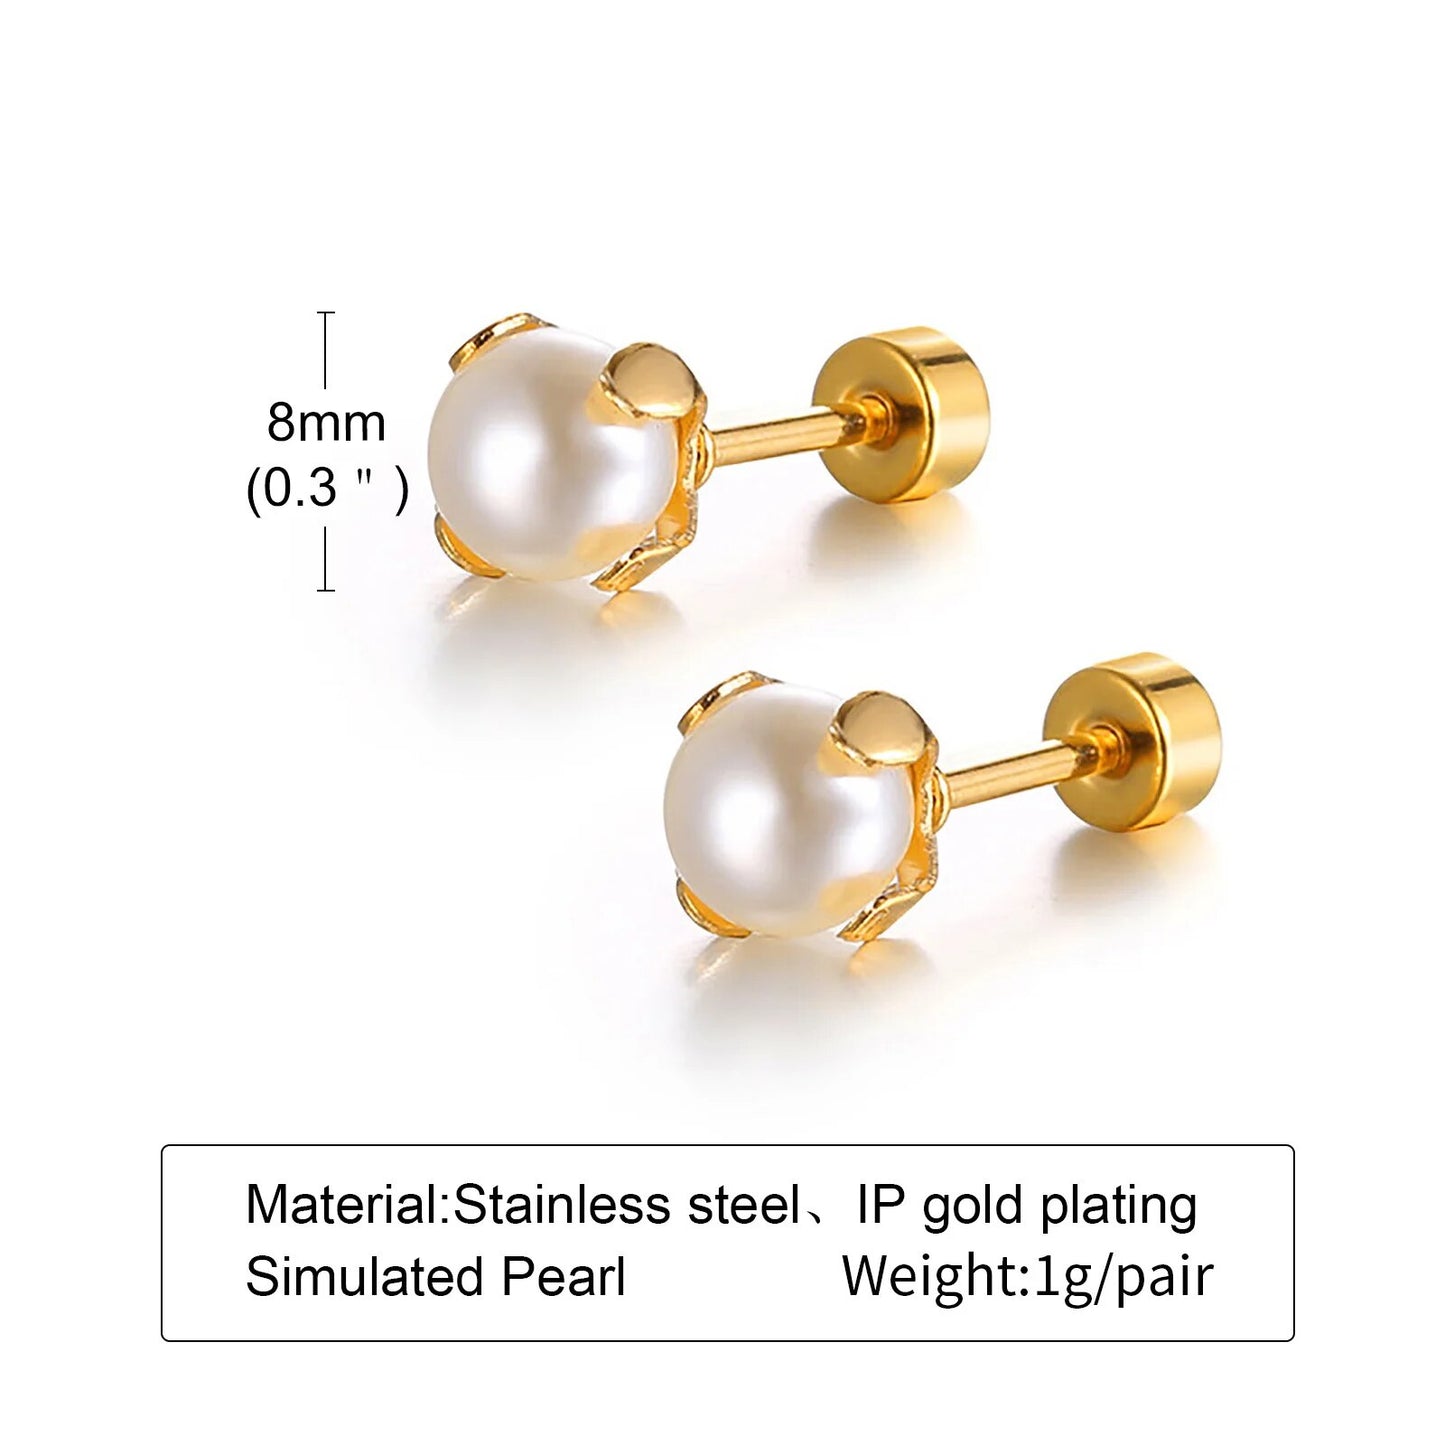 Women's Earrings Aretes para mujeres Simple Basic Stud Earrings for Women Men, Stainless Steel with Simulated Pearl Earrings, Casual Girl Boy Street Ear Jewelry